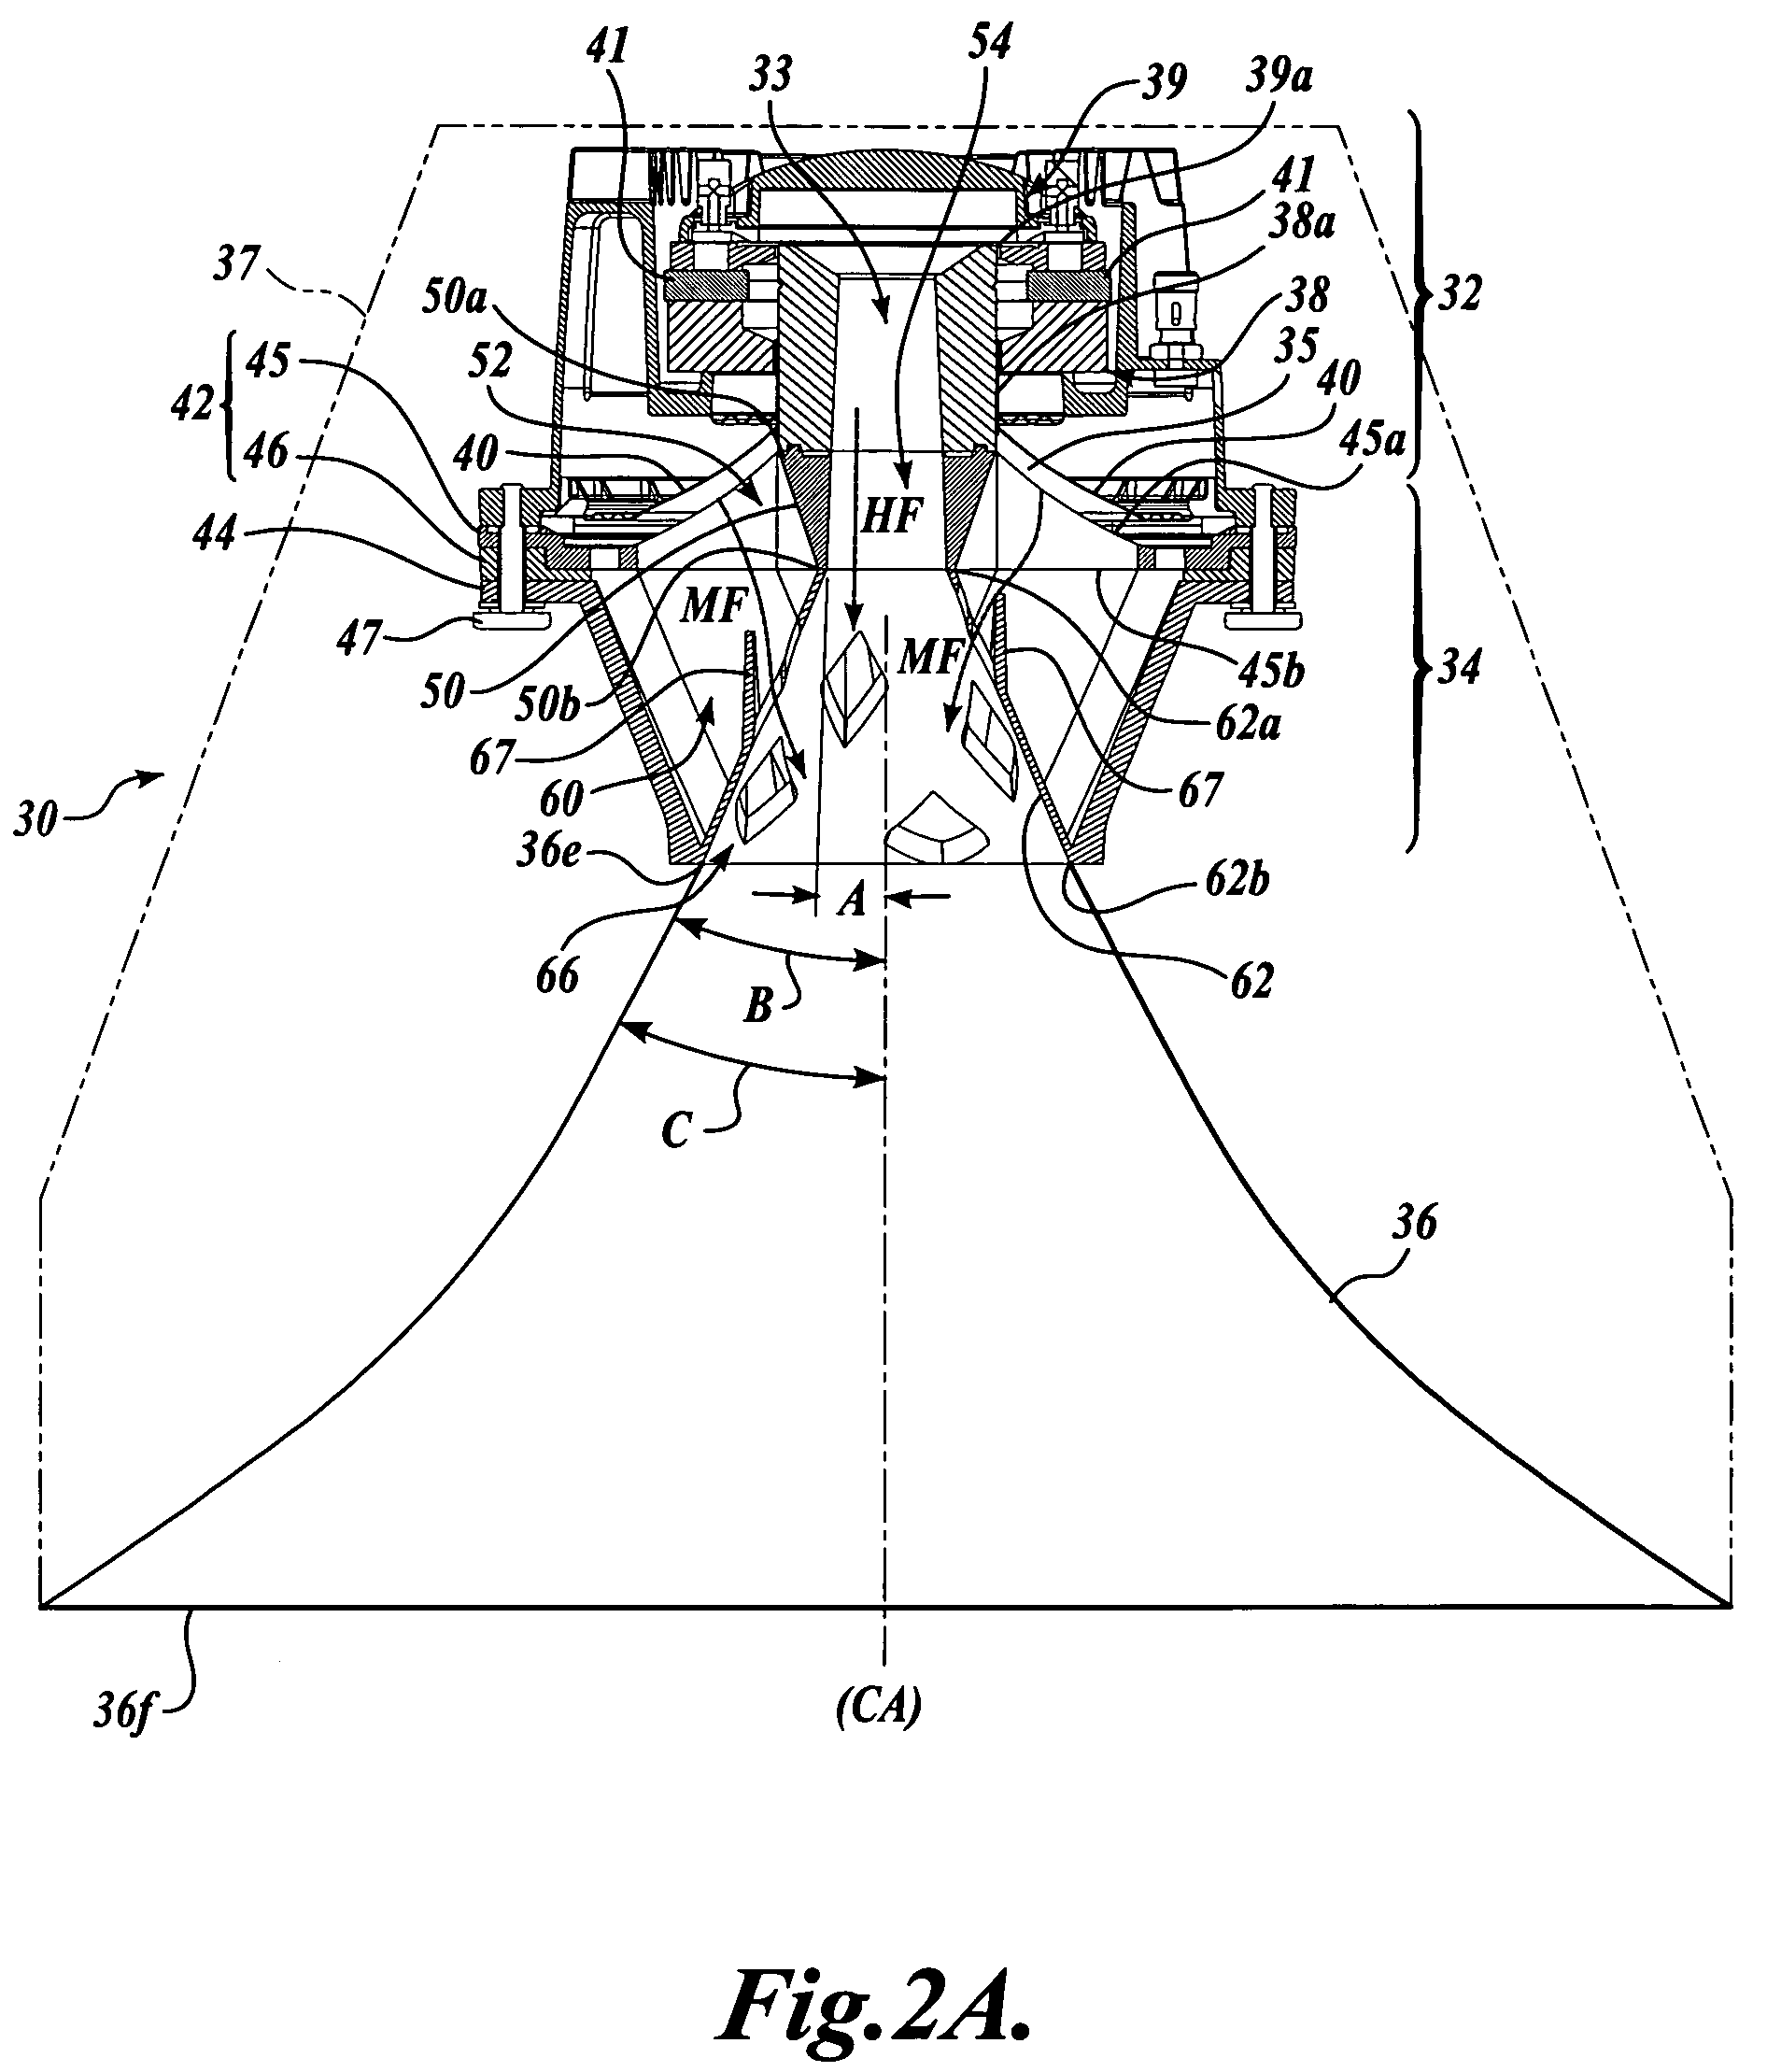 Coaxial mid-frequency and high-frequency loudspeaker